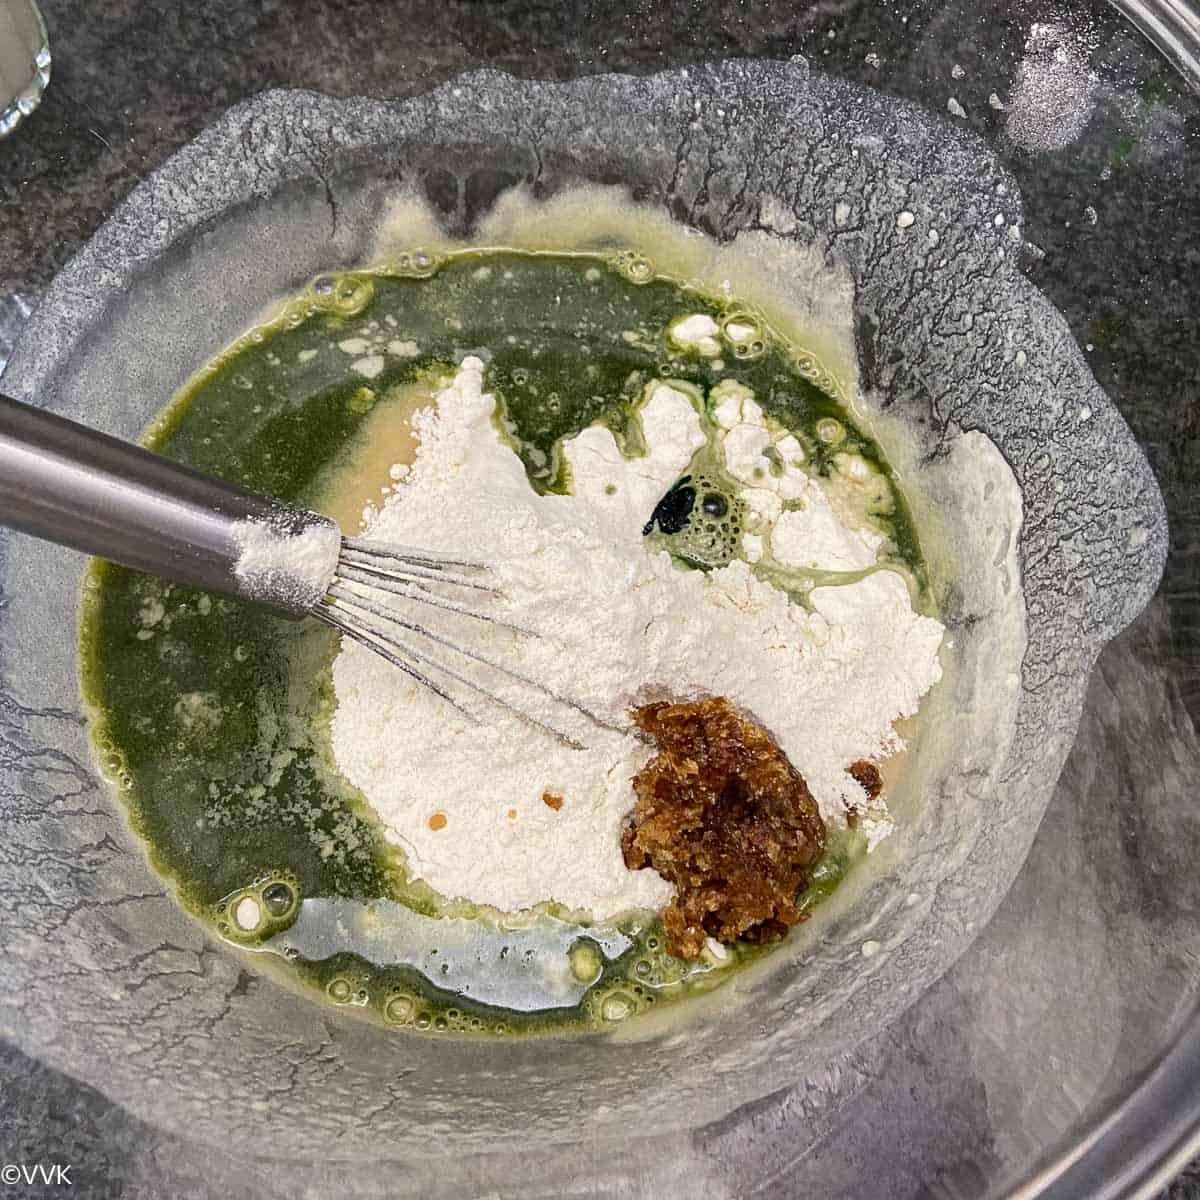 adding some more dry ingredients and betel juice